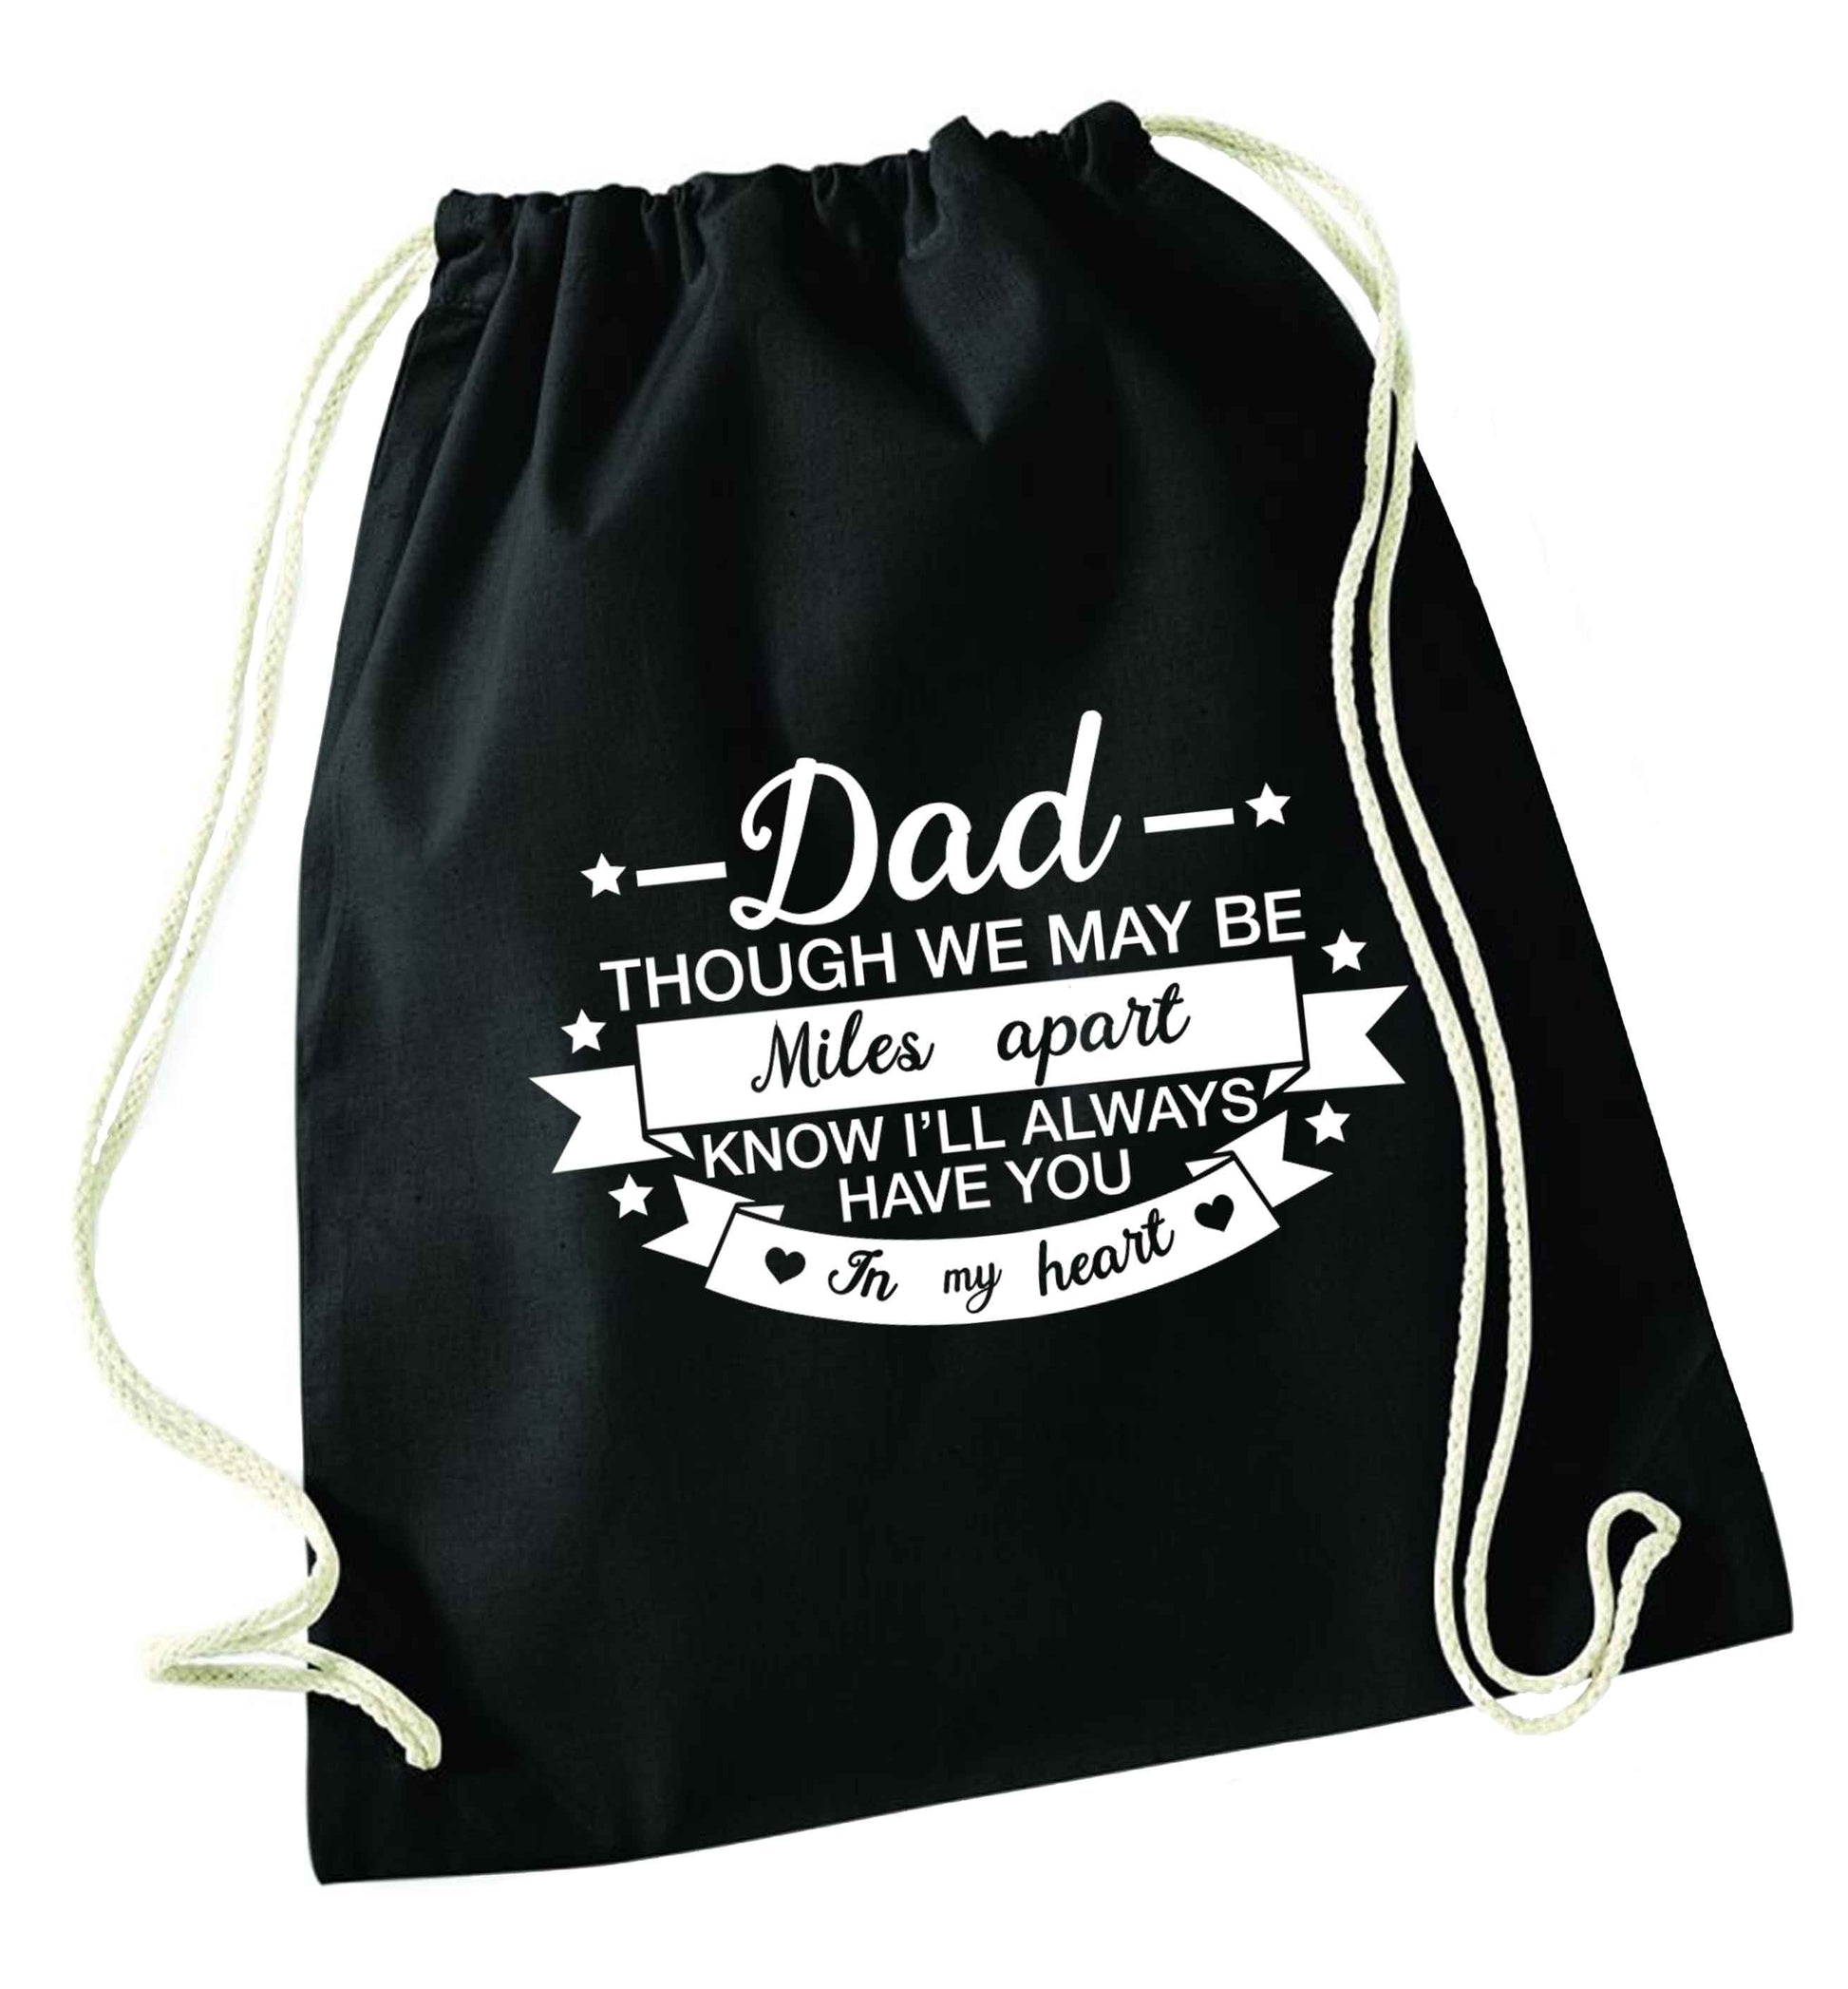 Dad though we are miles apart know I'll always have you in my heart black drawstring bag